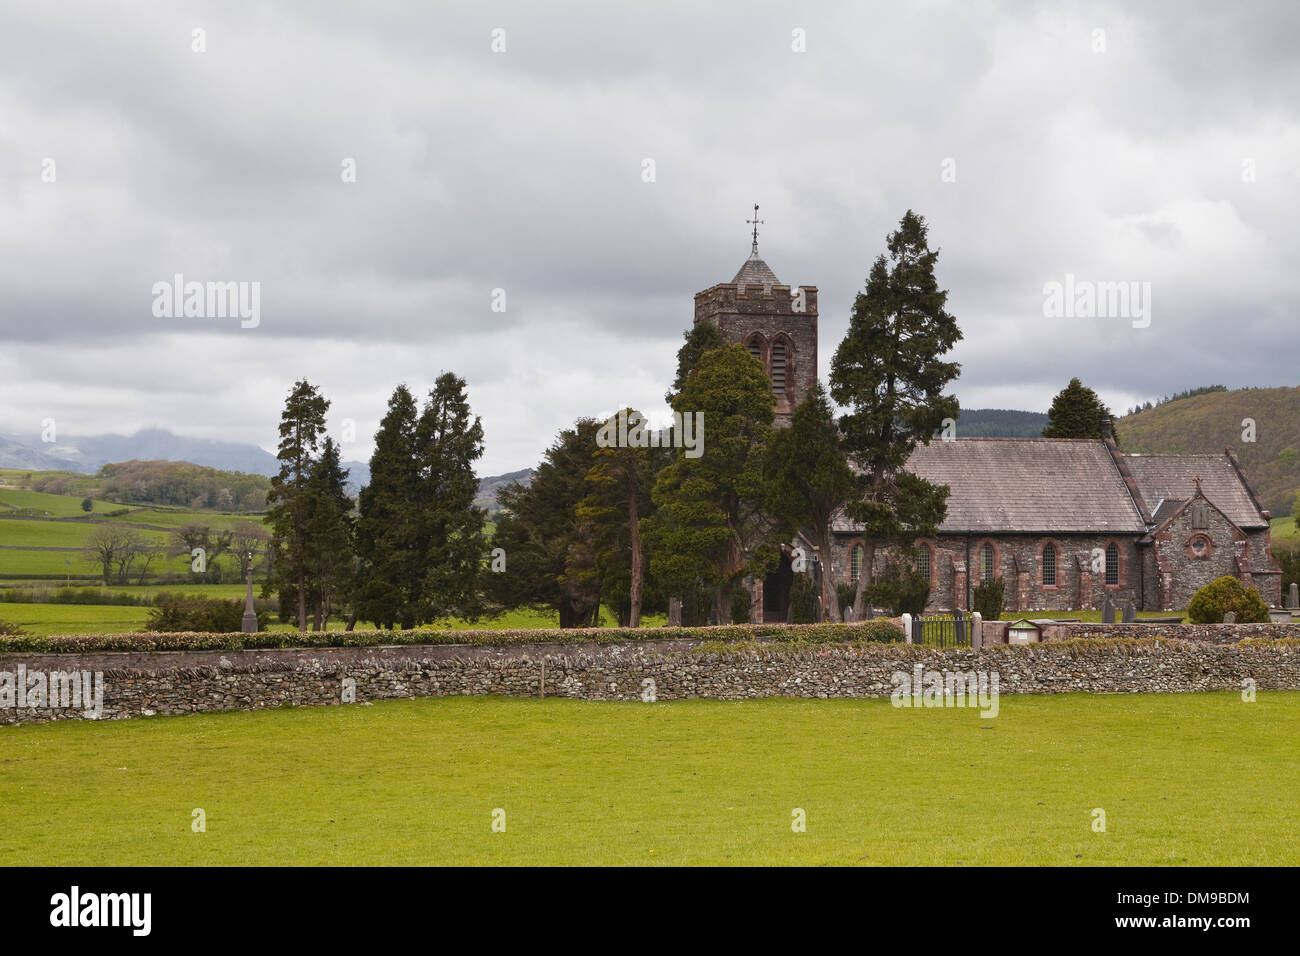 St Luke's church in the village of Lowick. The church is in the Lake District national park, England. Stock Photo